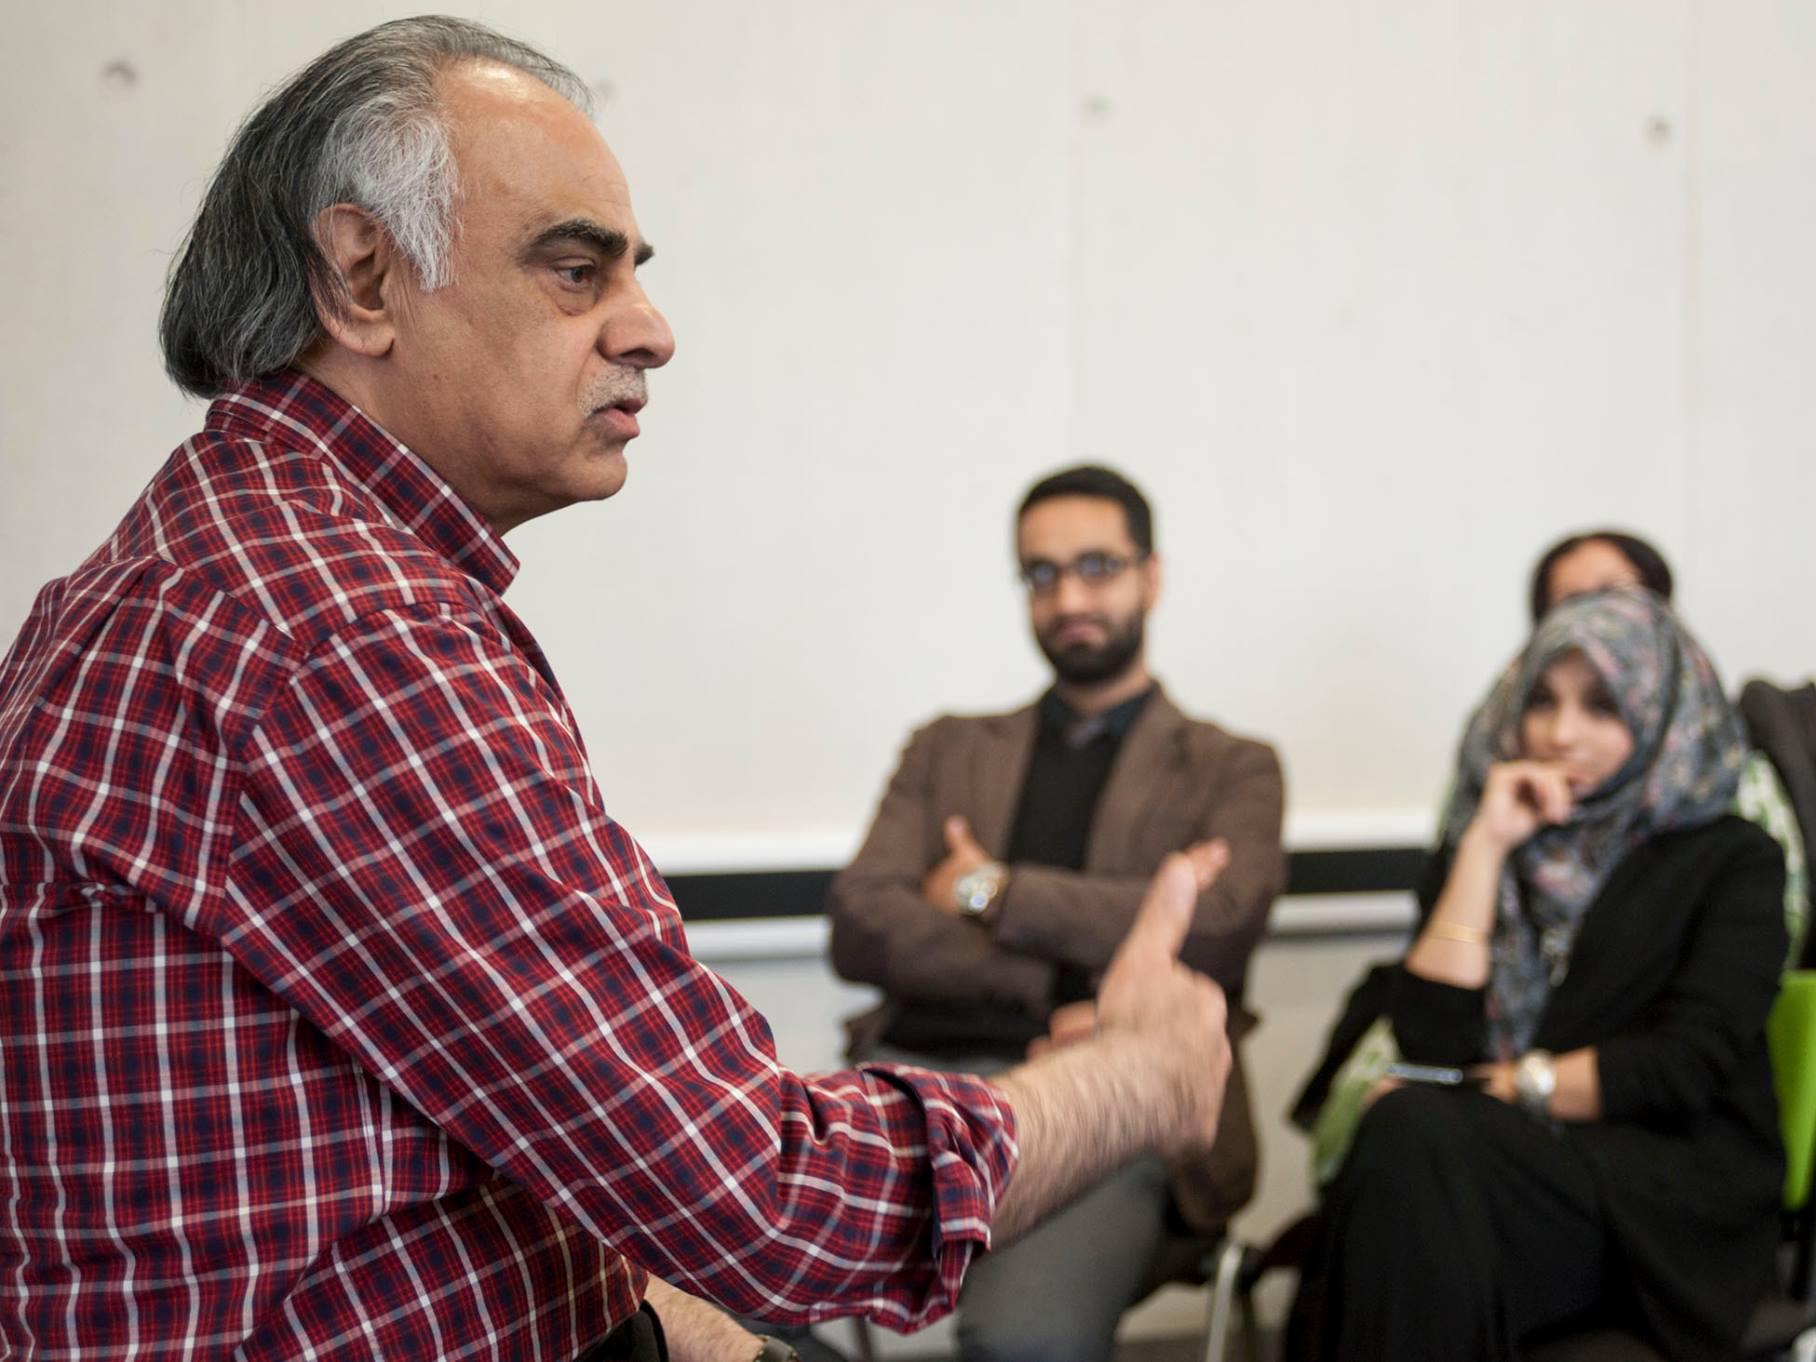 “We have not learned to live with diversity,” says Ziauddin Sardar